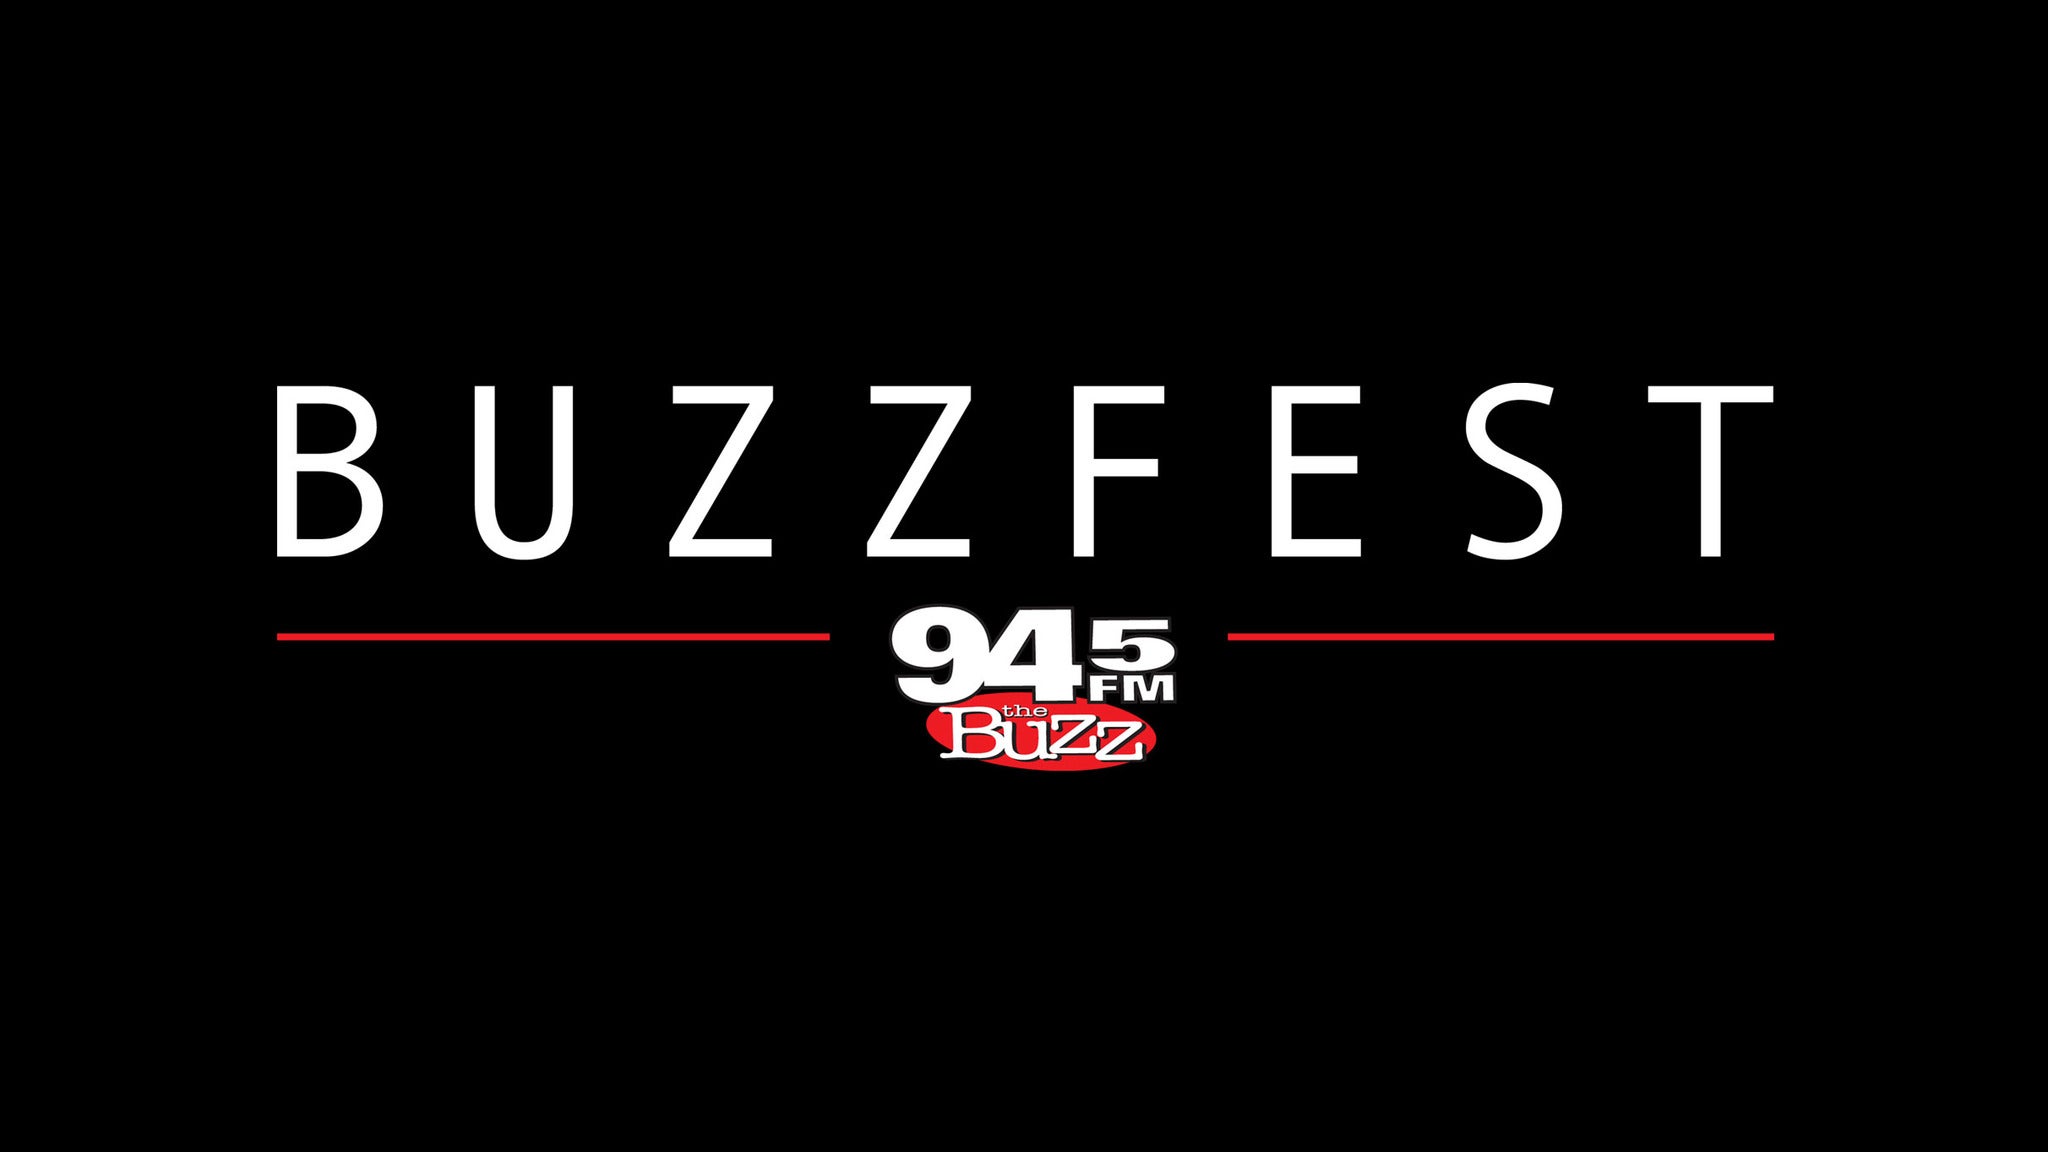 94.50 The Buzz  Buzzfest in Woodlands promo photo for Early Bird Lawn Special presale offer code